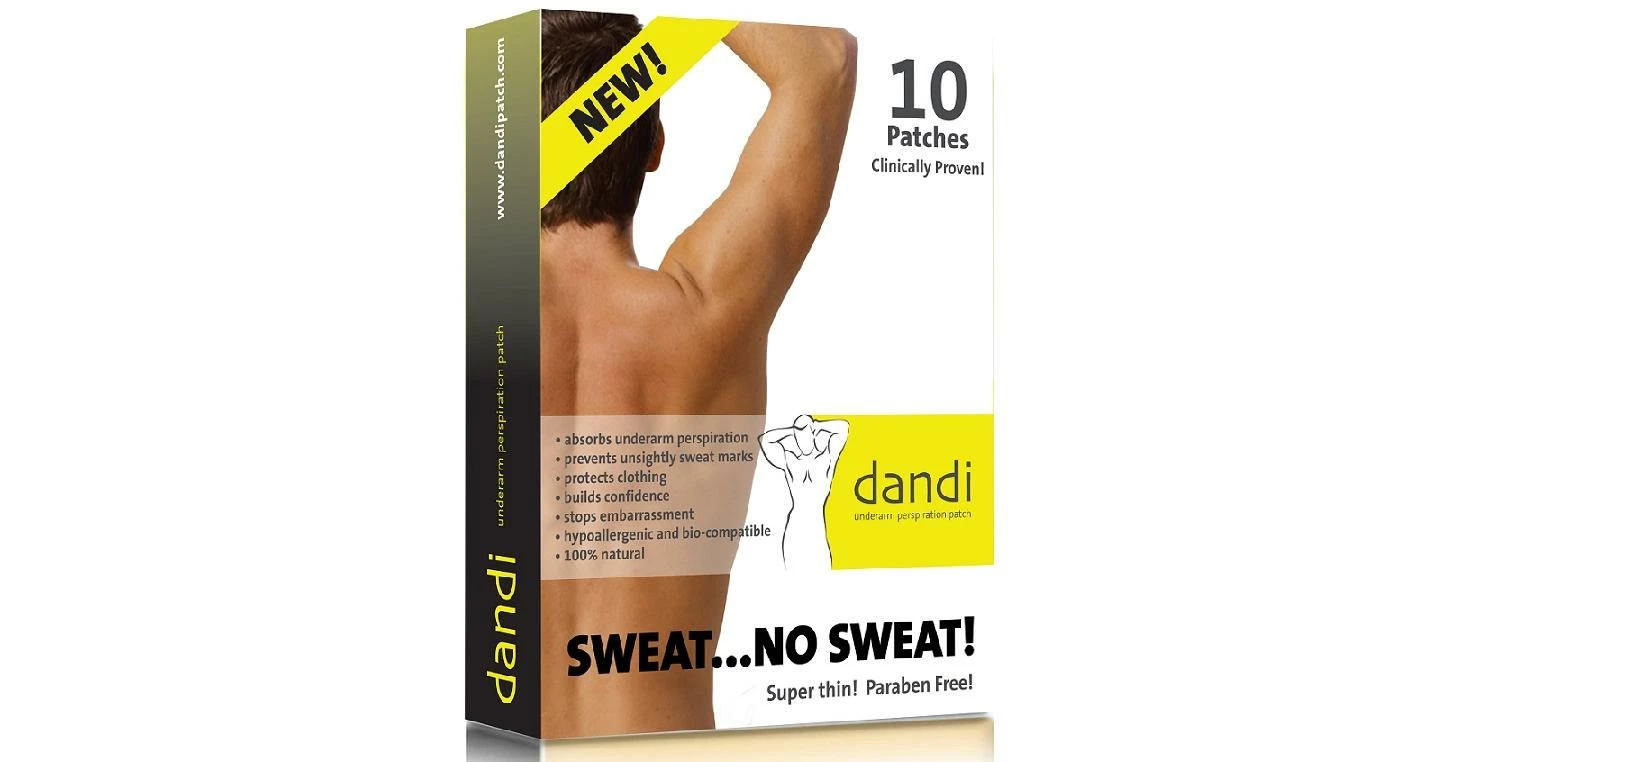 Dandi Patch for Men £6.99 for a box of 10 www.dandipatch.com